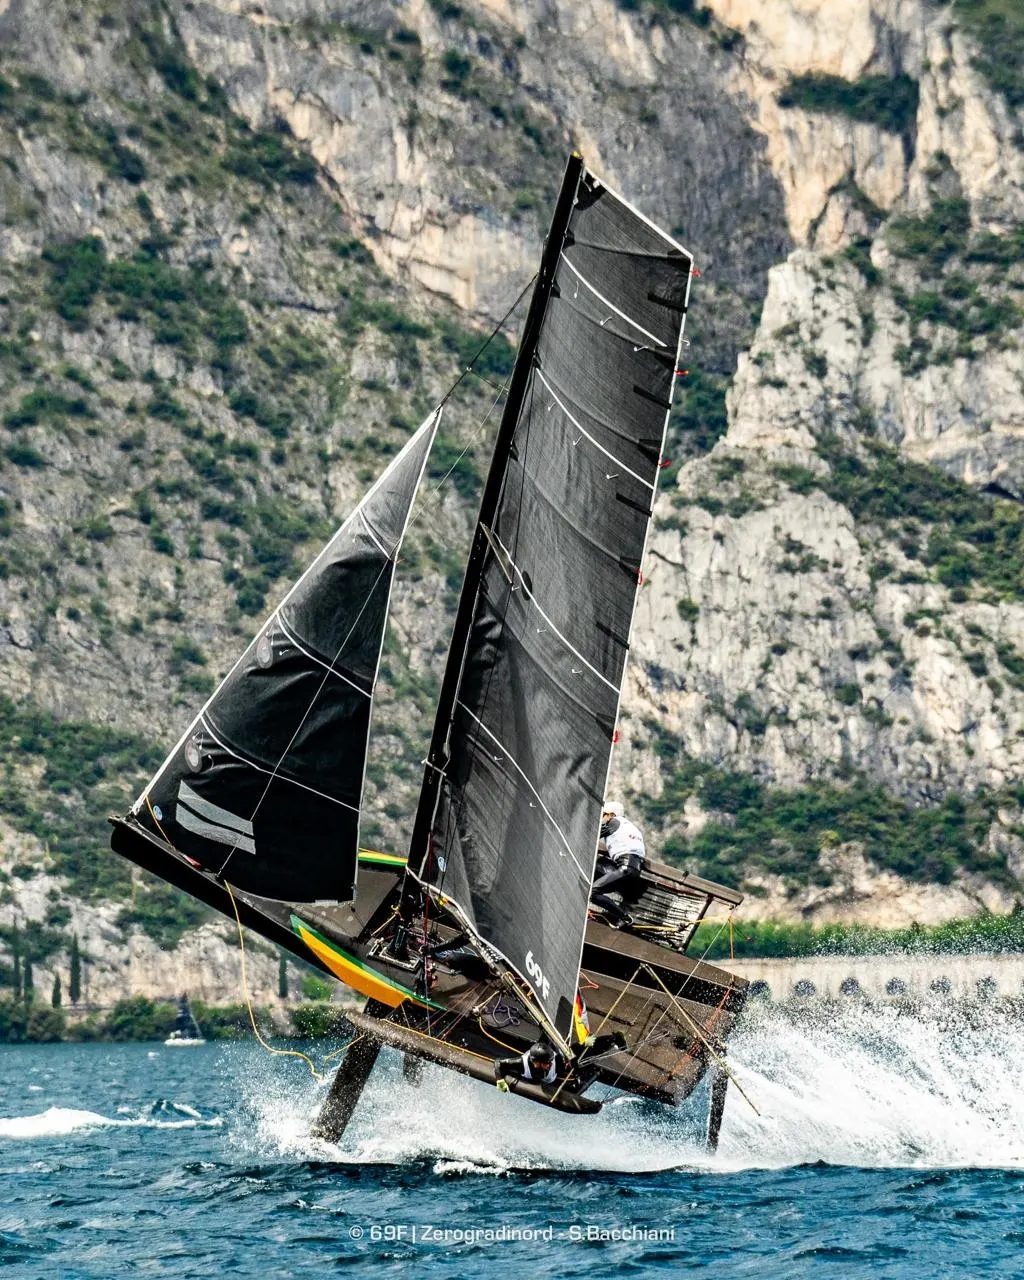  Persico 69F  Youth Gold Cup  Torbole ITA  Day 3